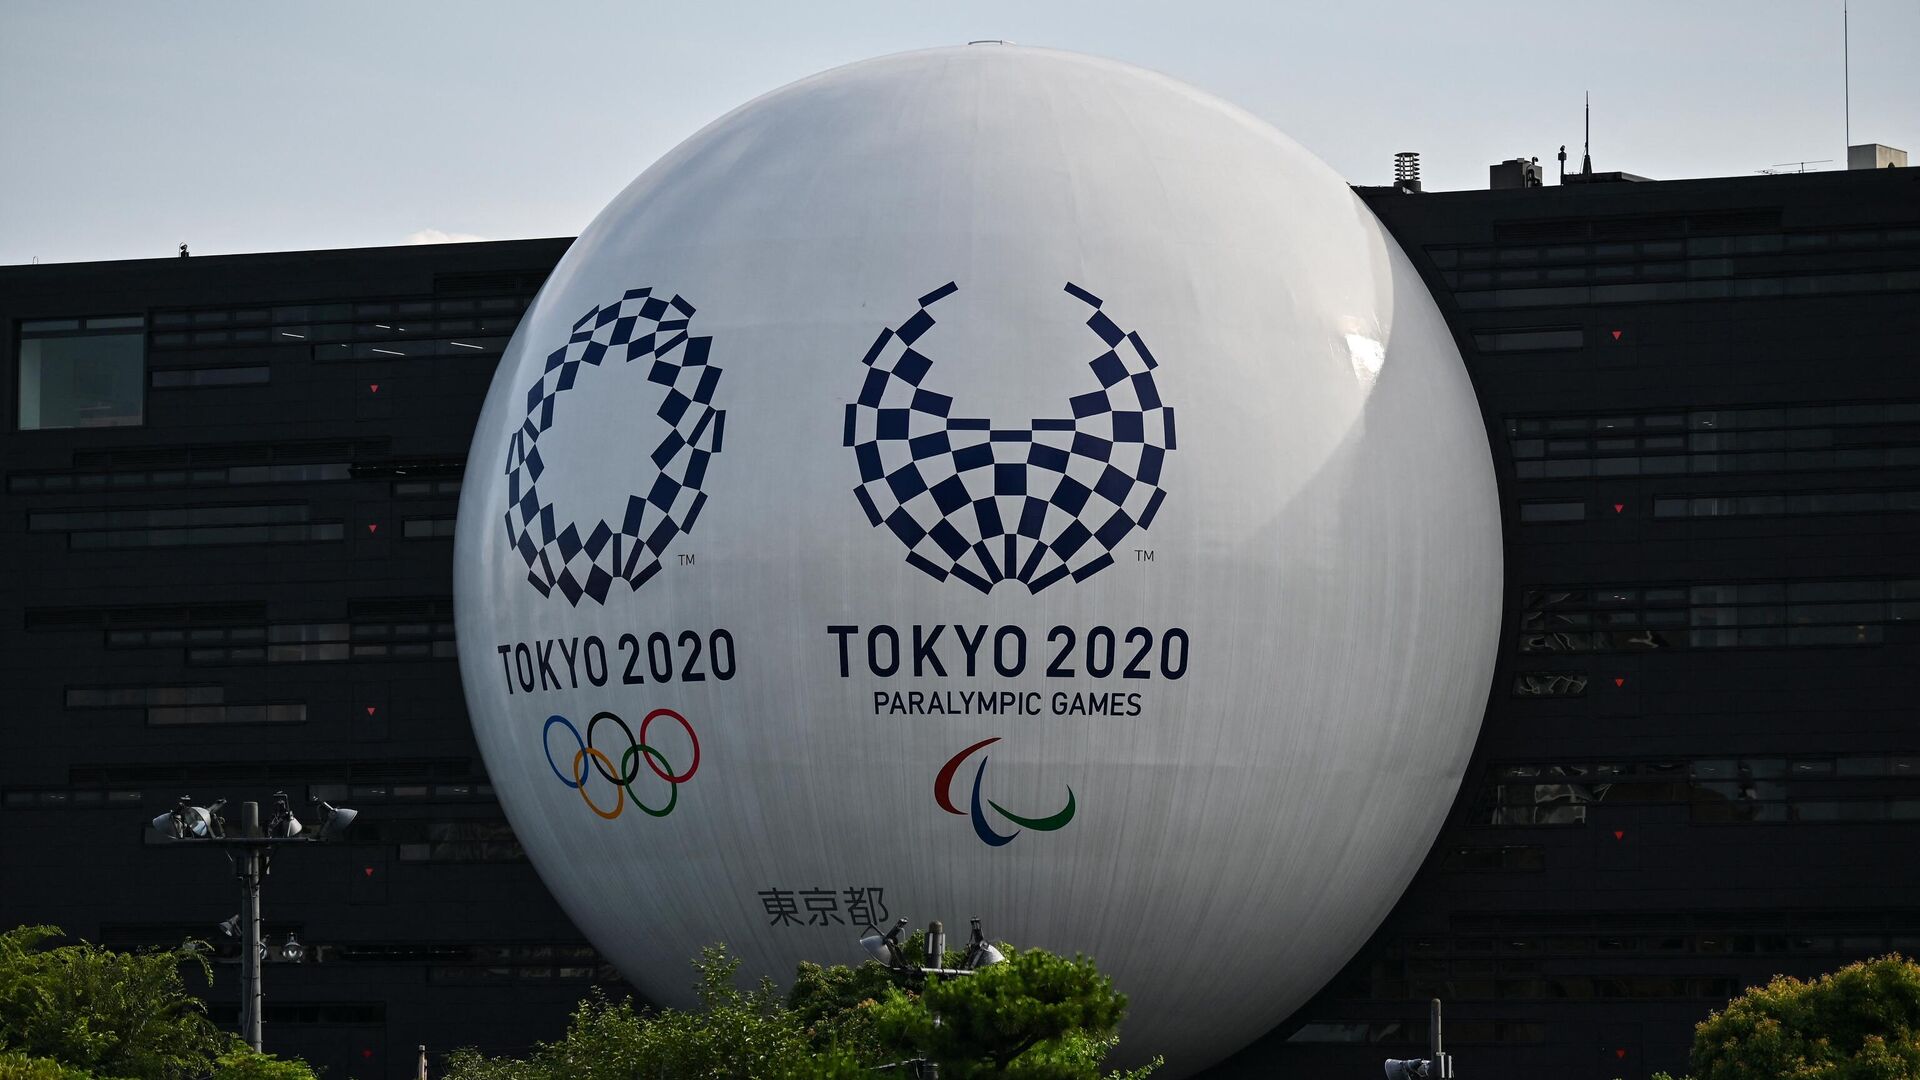 The Tokyo 2020 Olympic and Paralympic logos are displayed on the Hinomaru driving school building in Tokyo on June 29, 2020. (Photo by CHARLY TRIBALLEAU / AFP) - РИА Новости, 1920, 16.08.2021